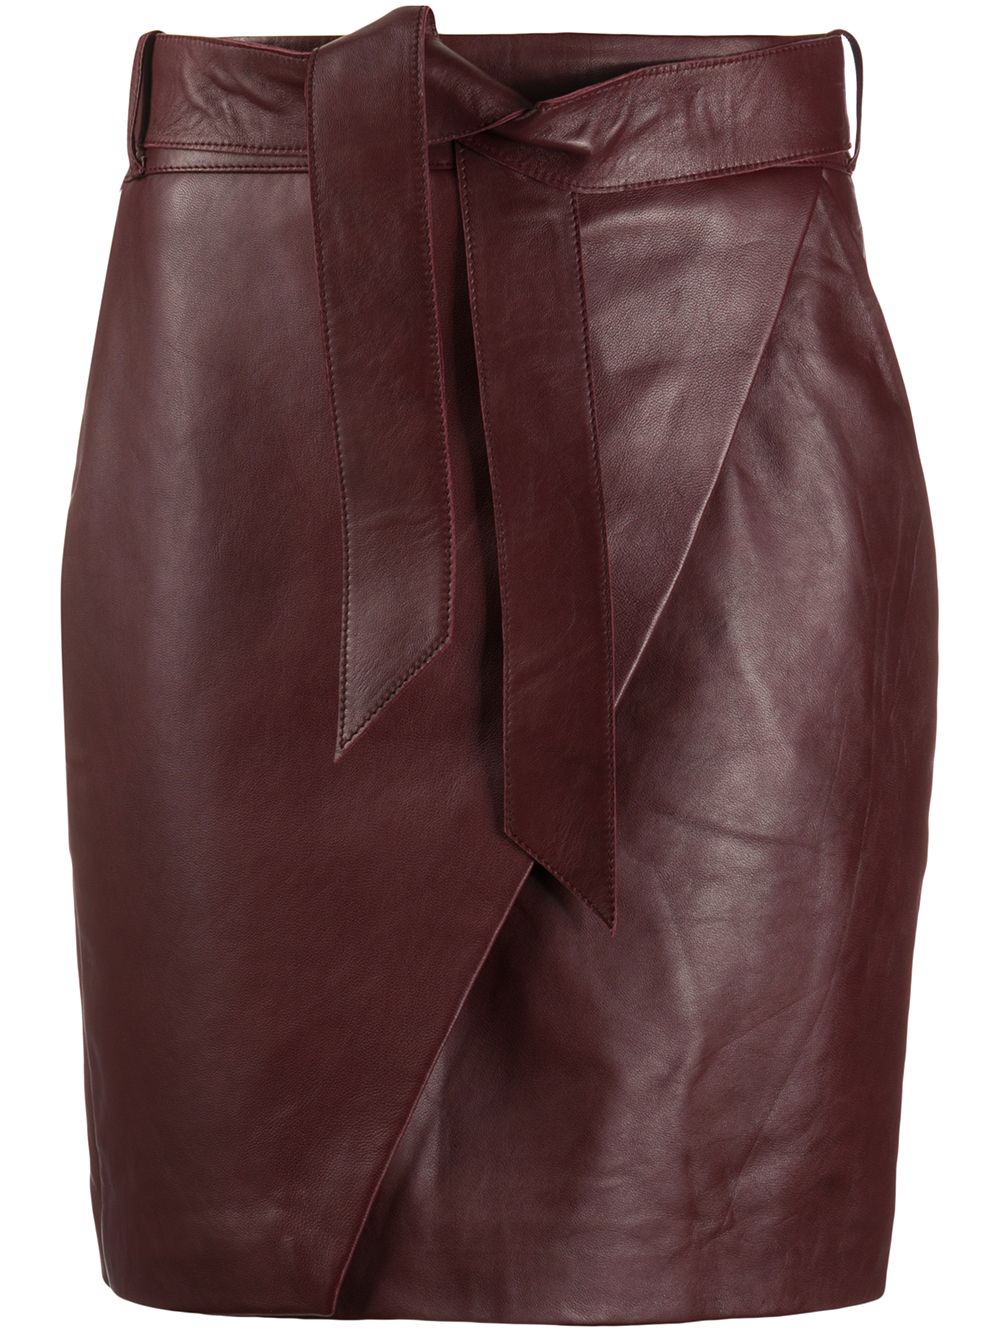 фото L'autre chose belted straight skirt